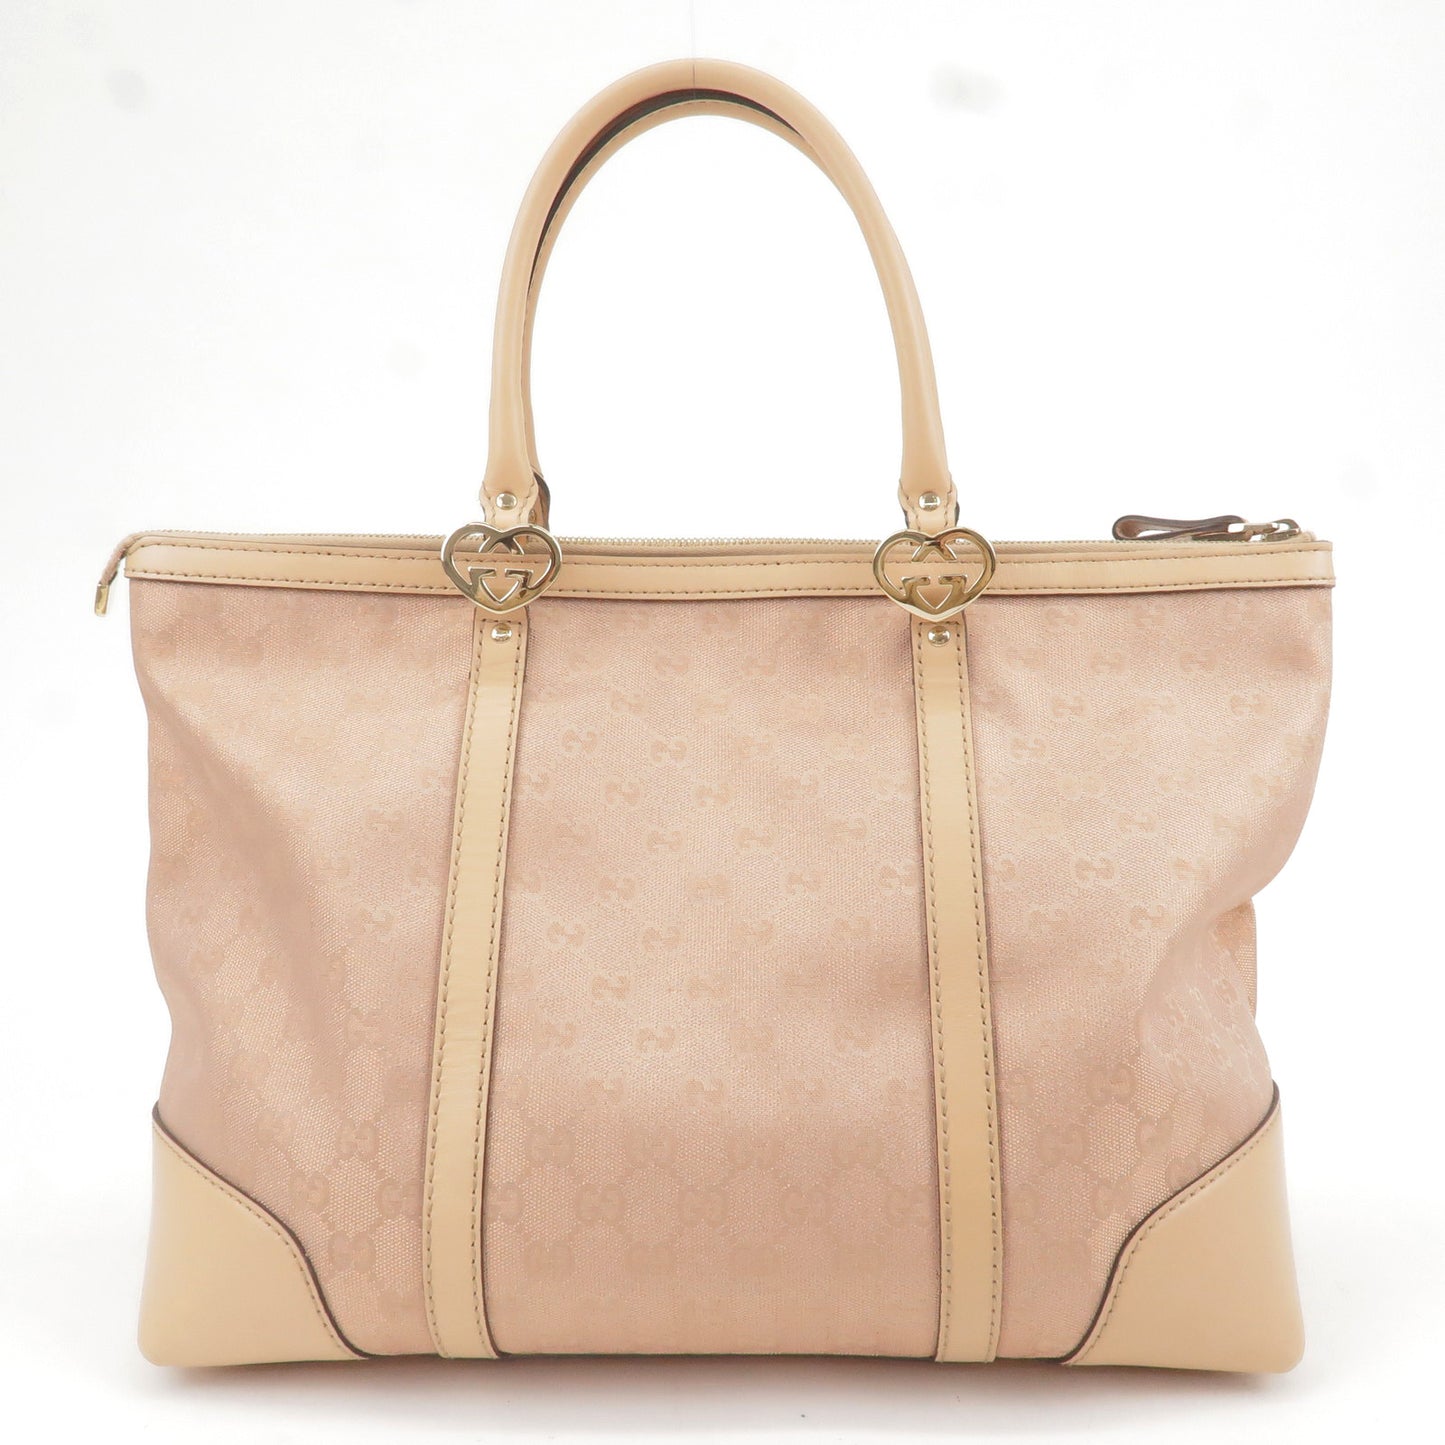 GUCCI Lovely GG Canvas Leather Tote Bag Pink Beige 257068